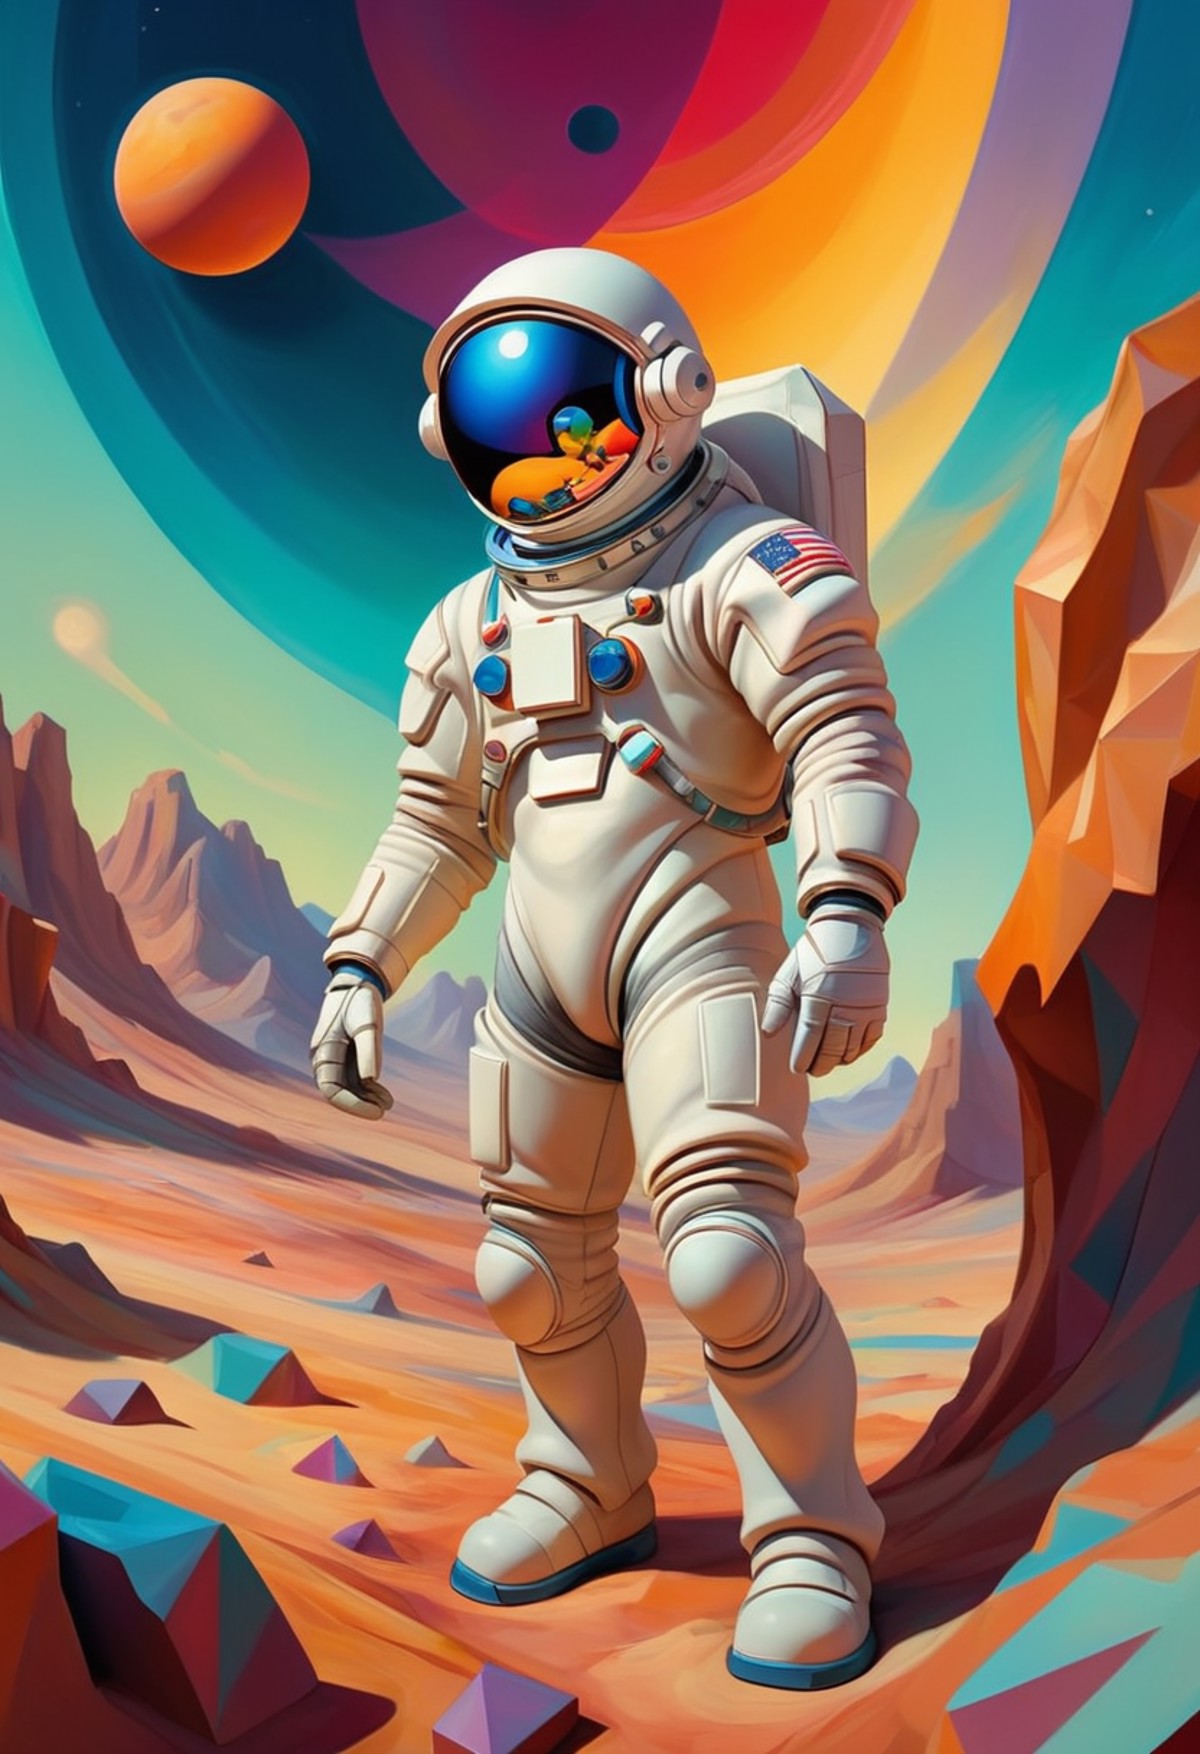 ,excellence a painting of, A solo astronaut (merging style:Renaissance with Cubism), standing on a vibrant alien planet, (...